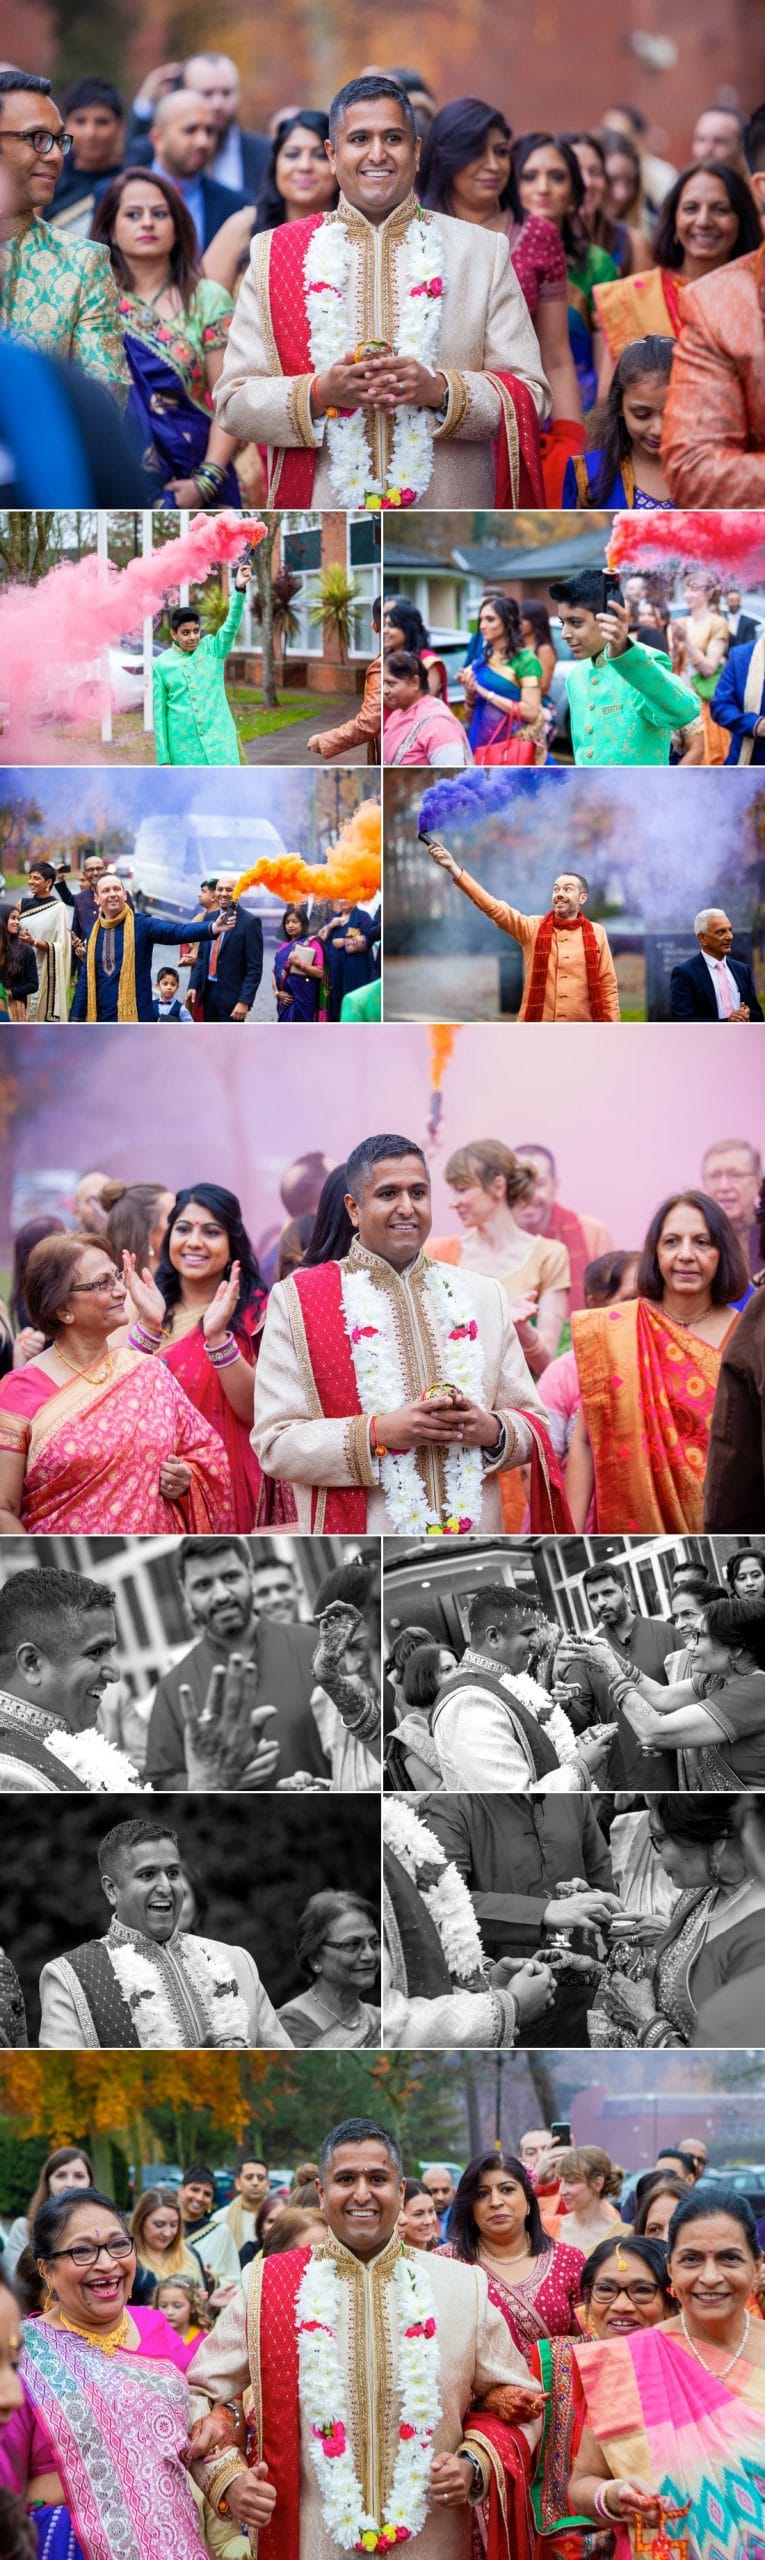 Hindu wedding Photography and Video at the Belfry Hotel 4 scaled